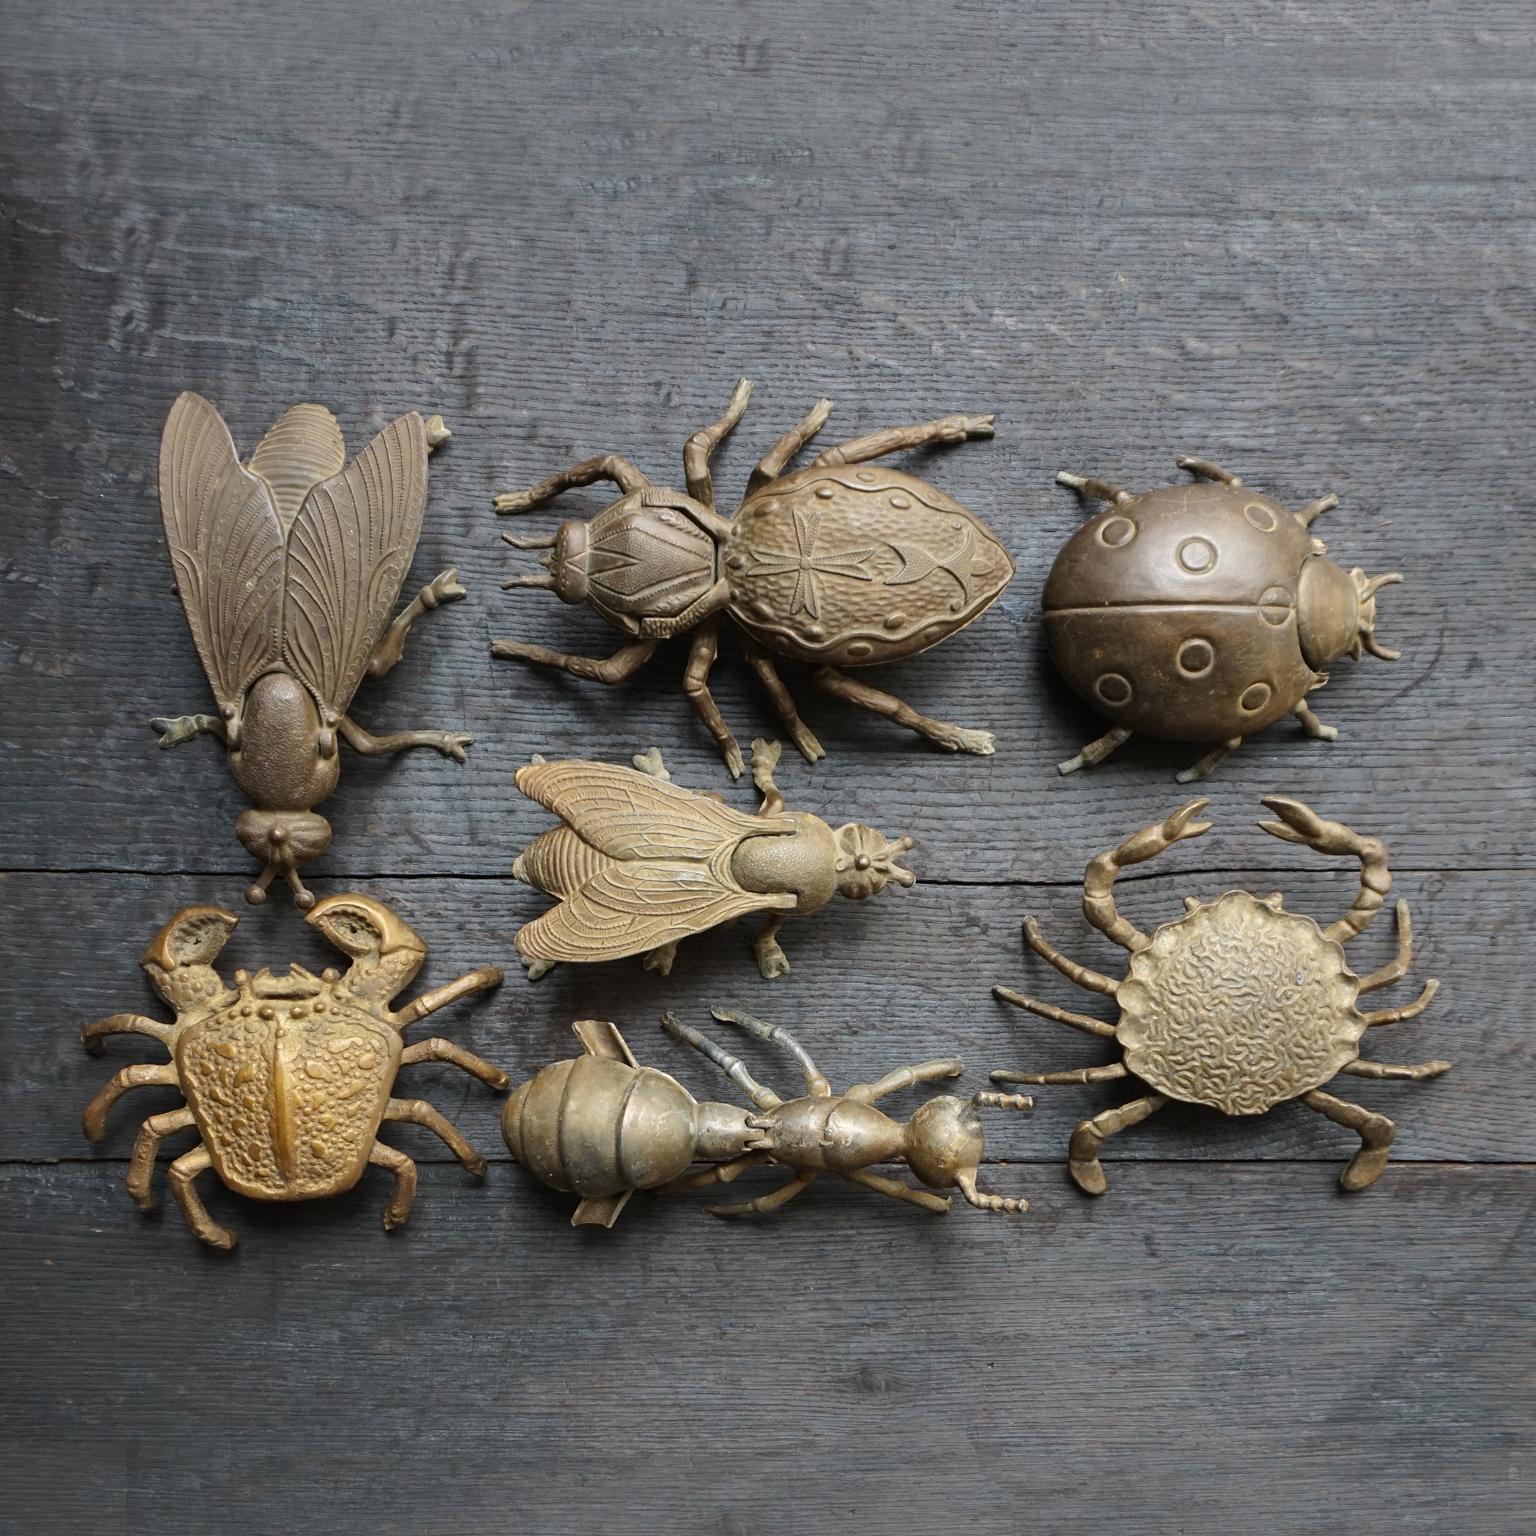 Set of seven detailed vintage 1960s-1970s large scale metal brass trinket dishes or ashtrays.
Two flies, two crabs, an ant, a ladybug and a spider.

Measurements L x W x H:
Spider 19 x 15 x 6 cm (7.5